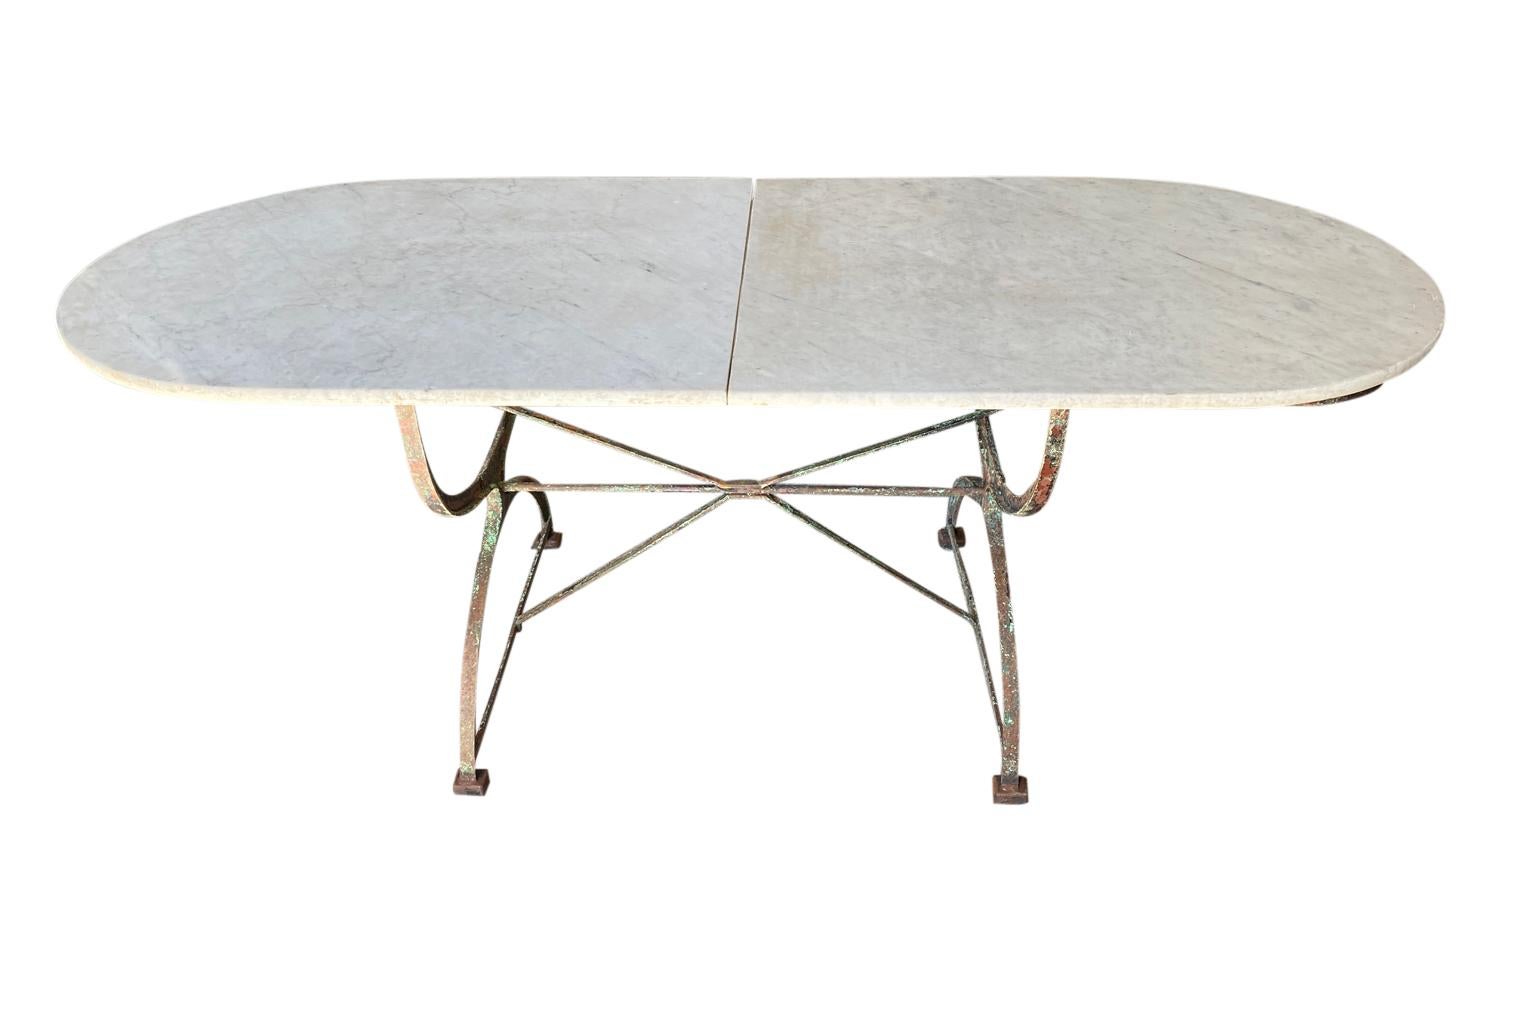 An outstanding and very beautiful 19th century oval shaped Garden Dining Table from the Provence region of France. Fabulous patina. Soundly constructed with a painted iron base and a marble top in 2 sections. Perfect for any interior of garden.